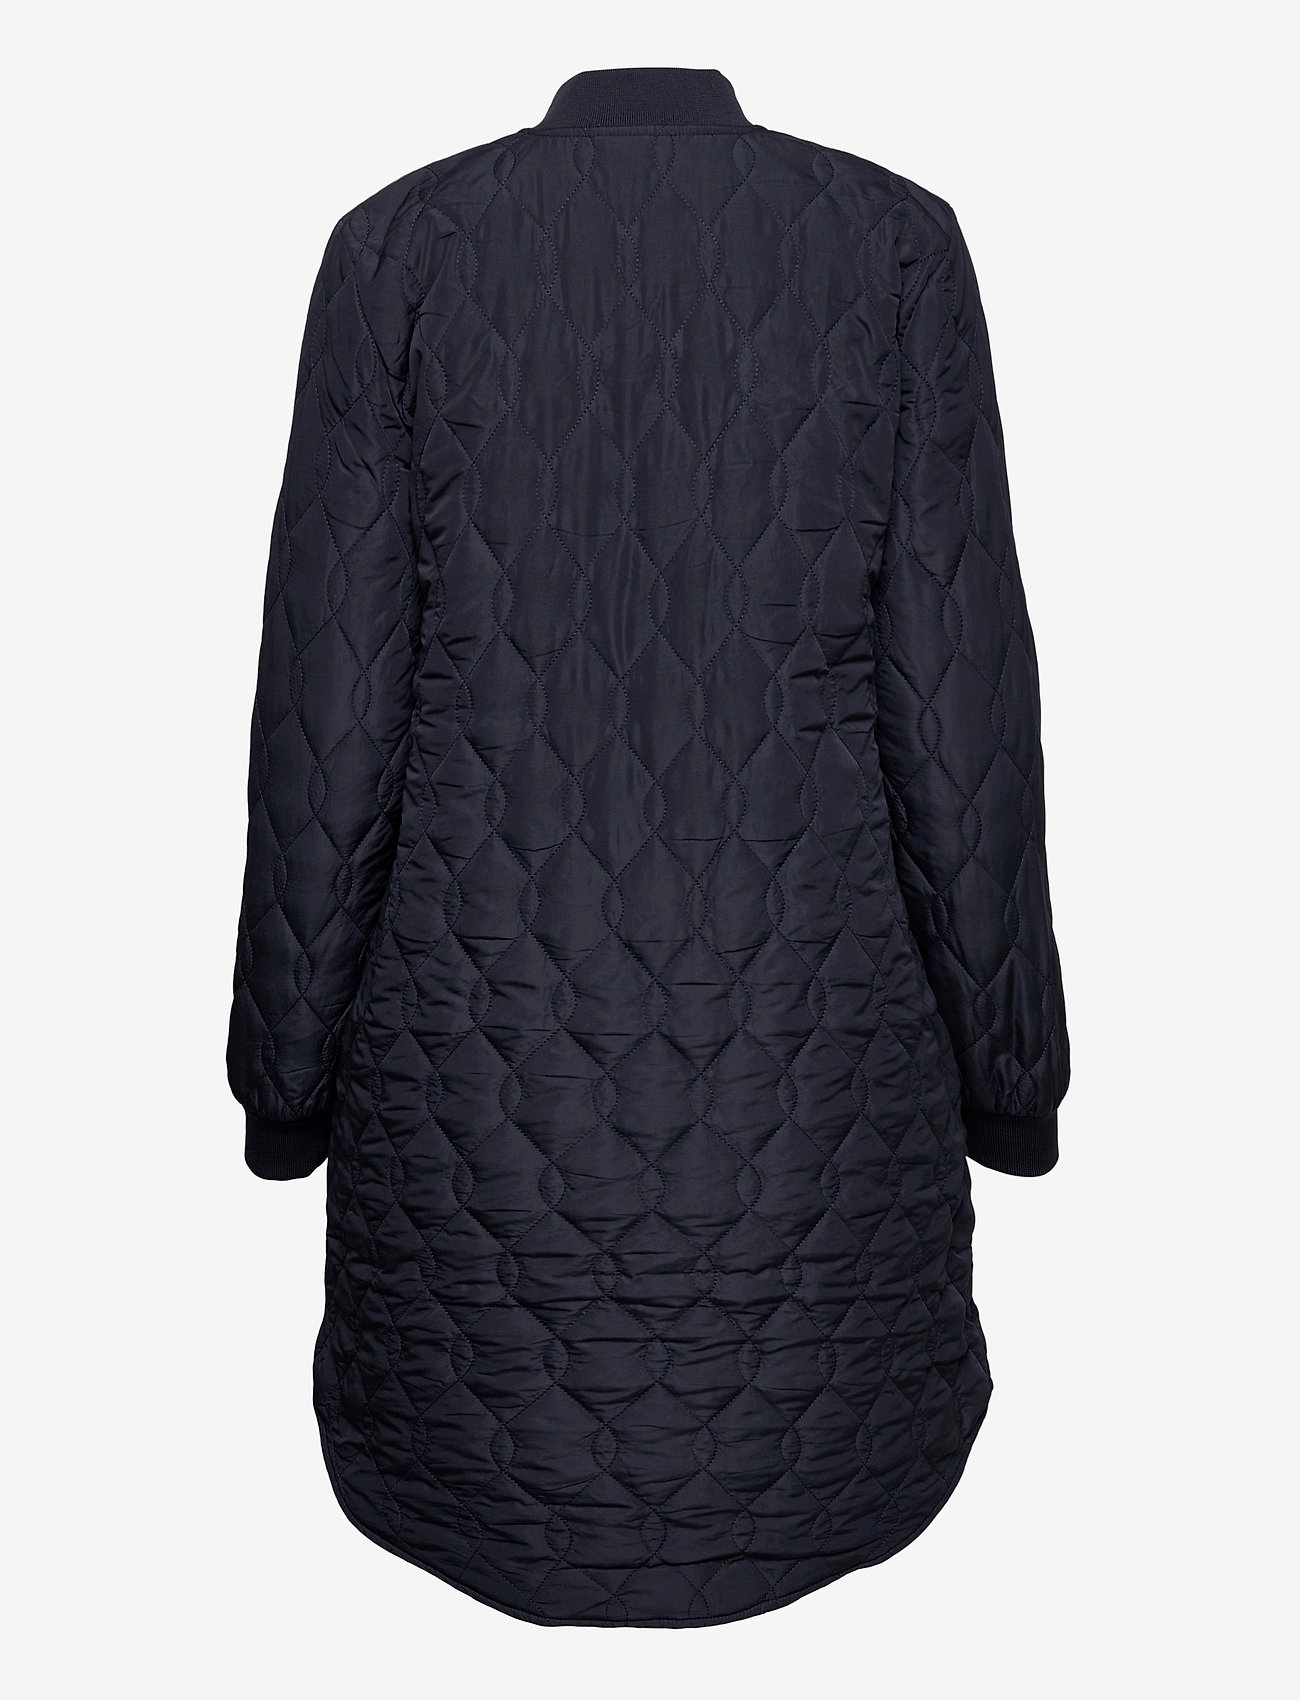 Kaffe - KAshally Quilted Coat - quilted jackets - midnight marine - 1